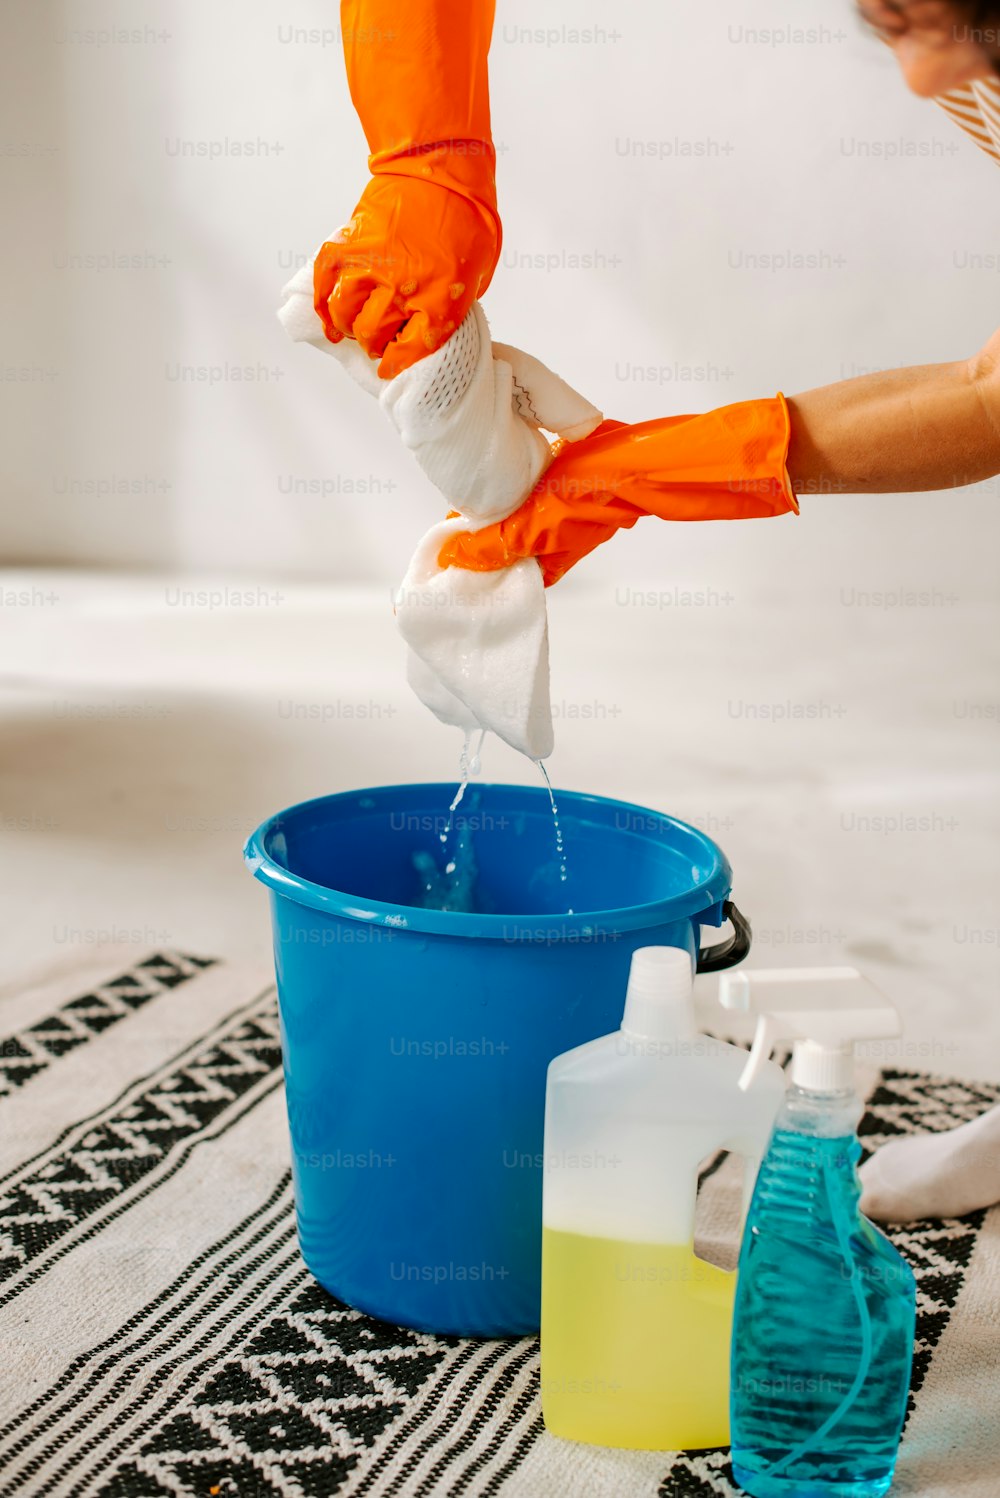 a person in orange gloves is pouring liquid into a blue bucket